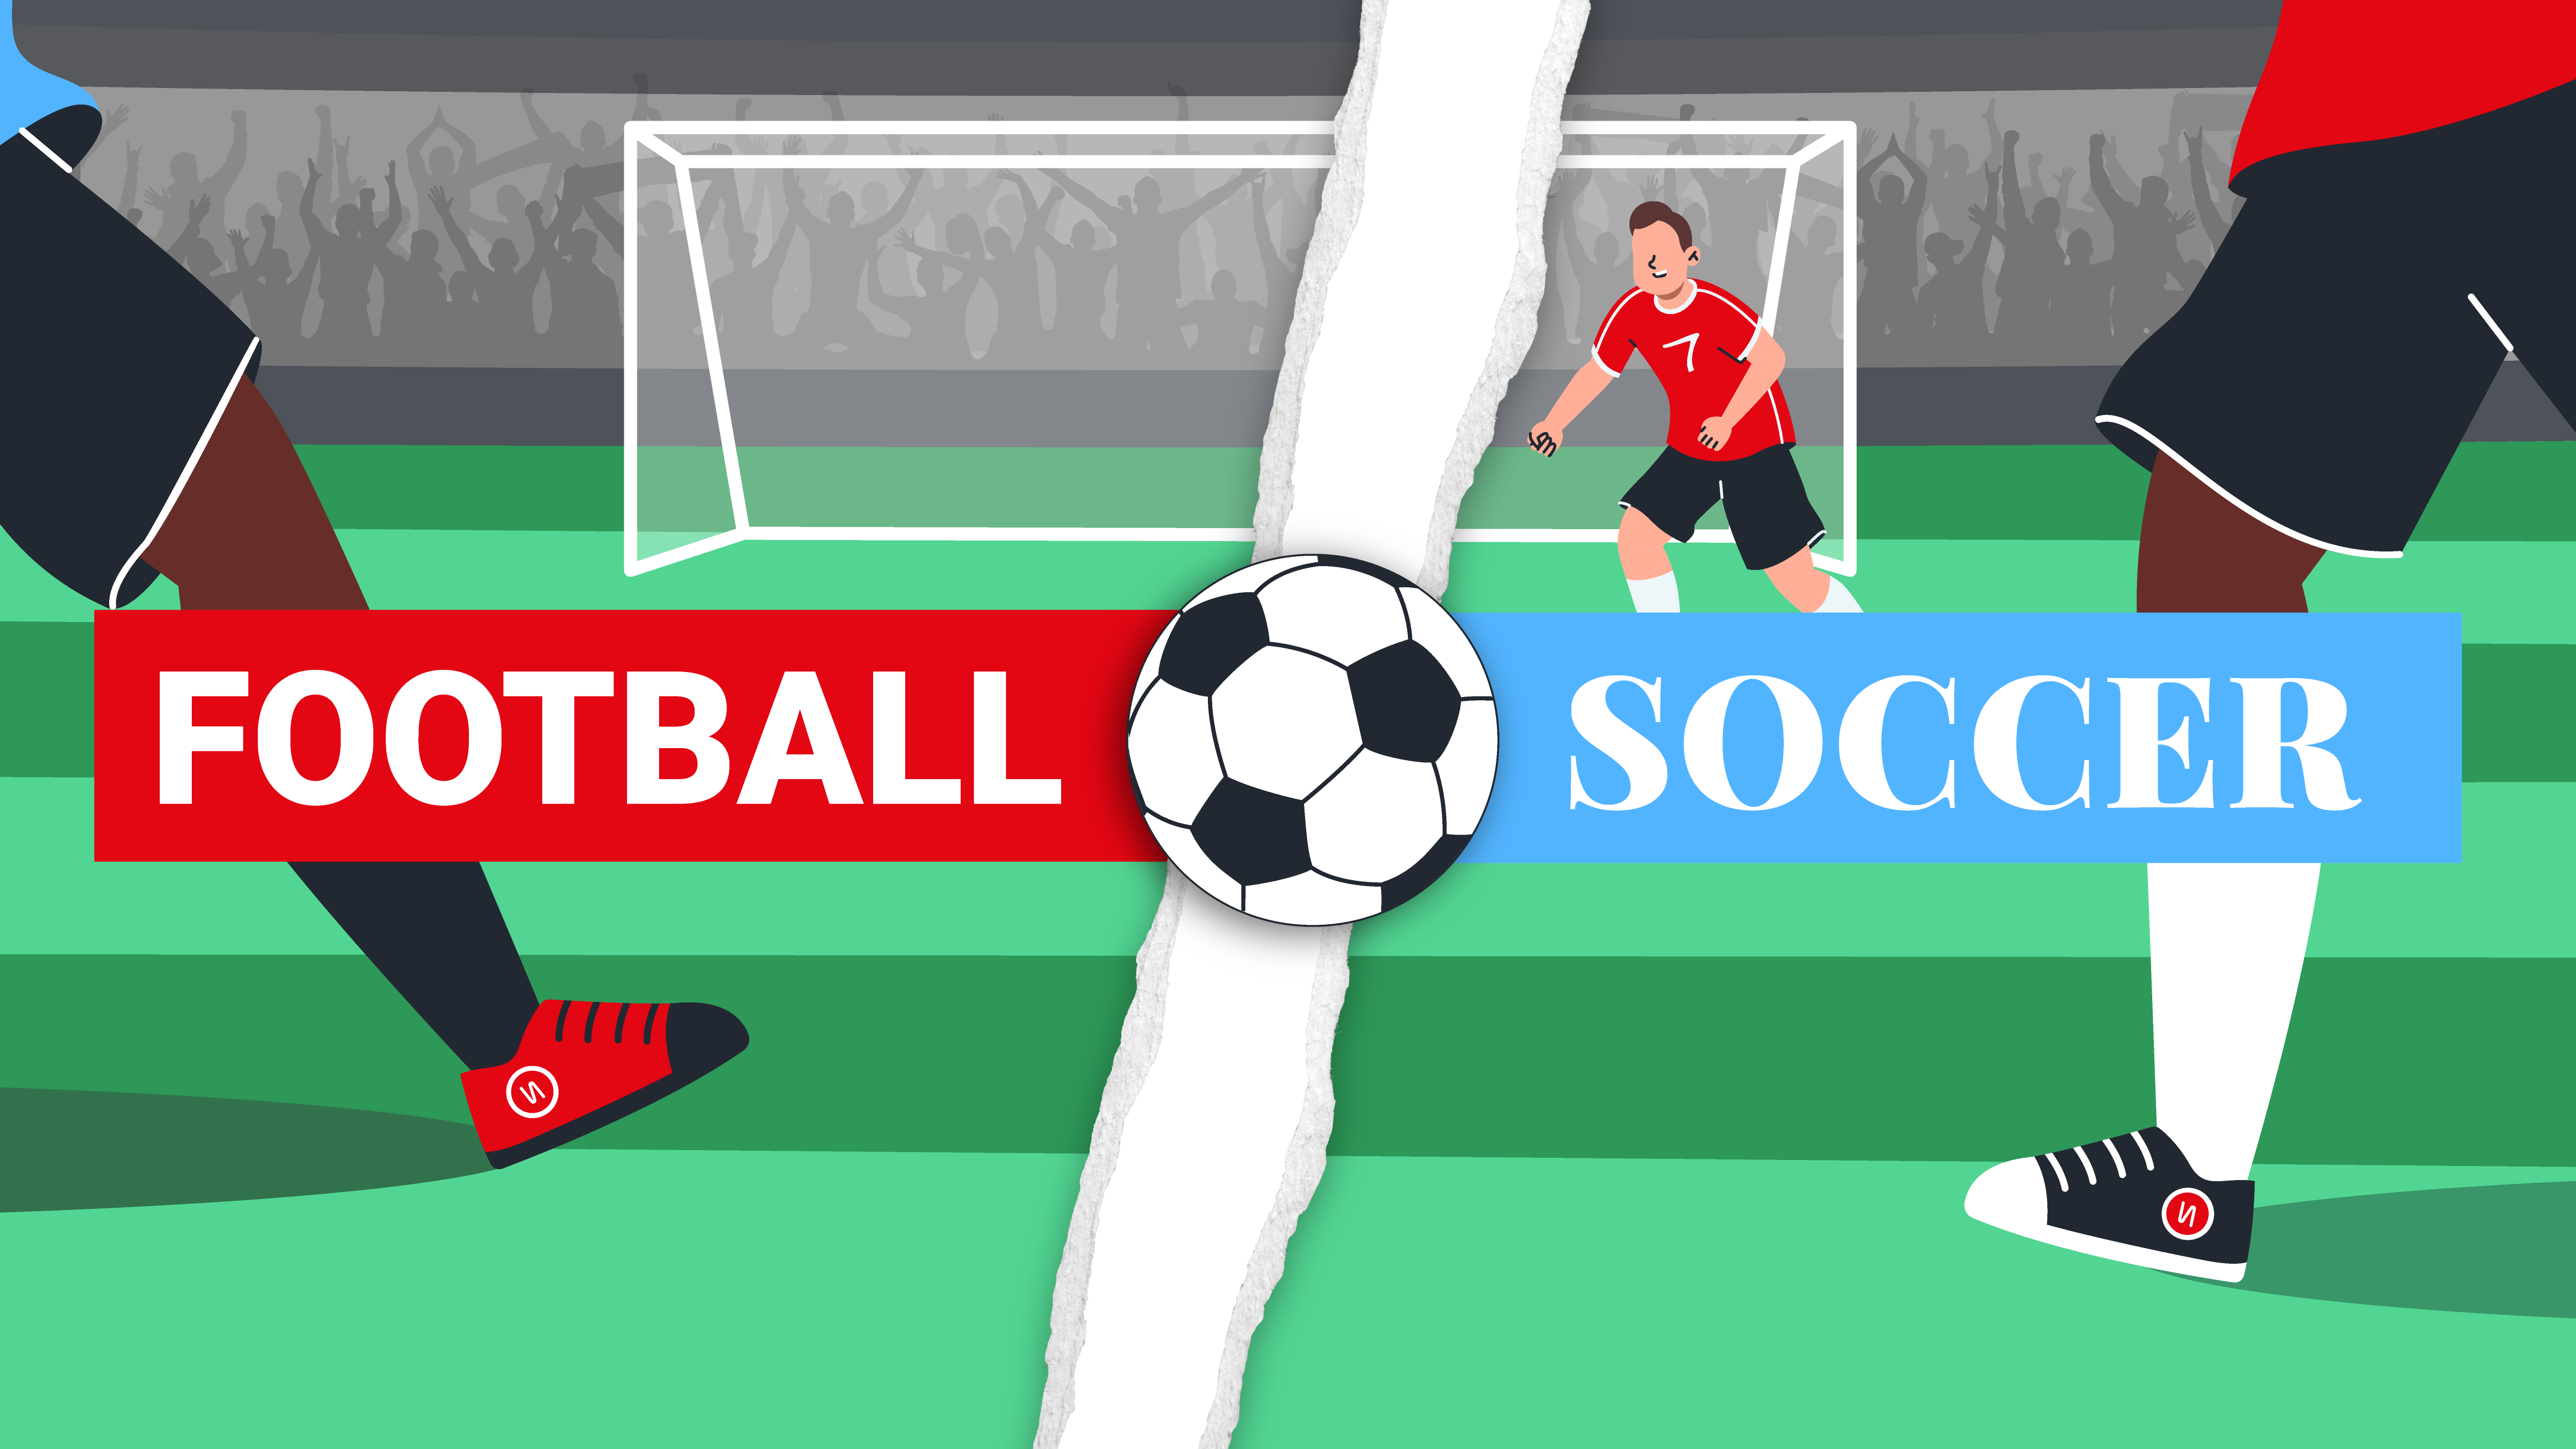 Illustration opposing on one side the word Football and on the other, Soccer.